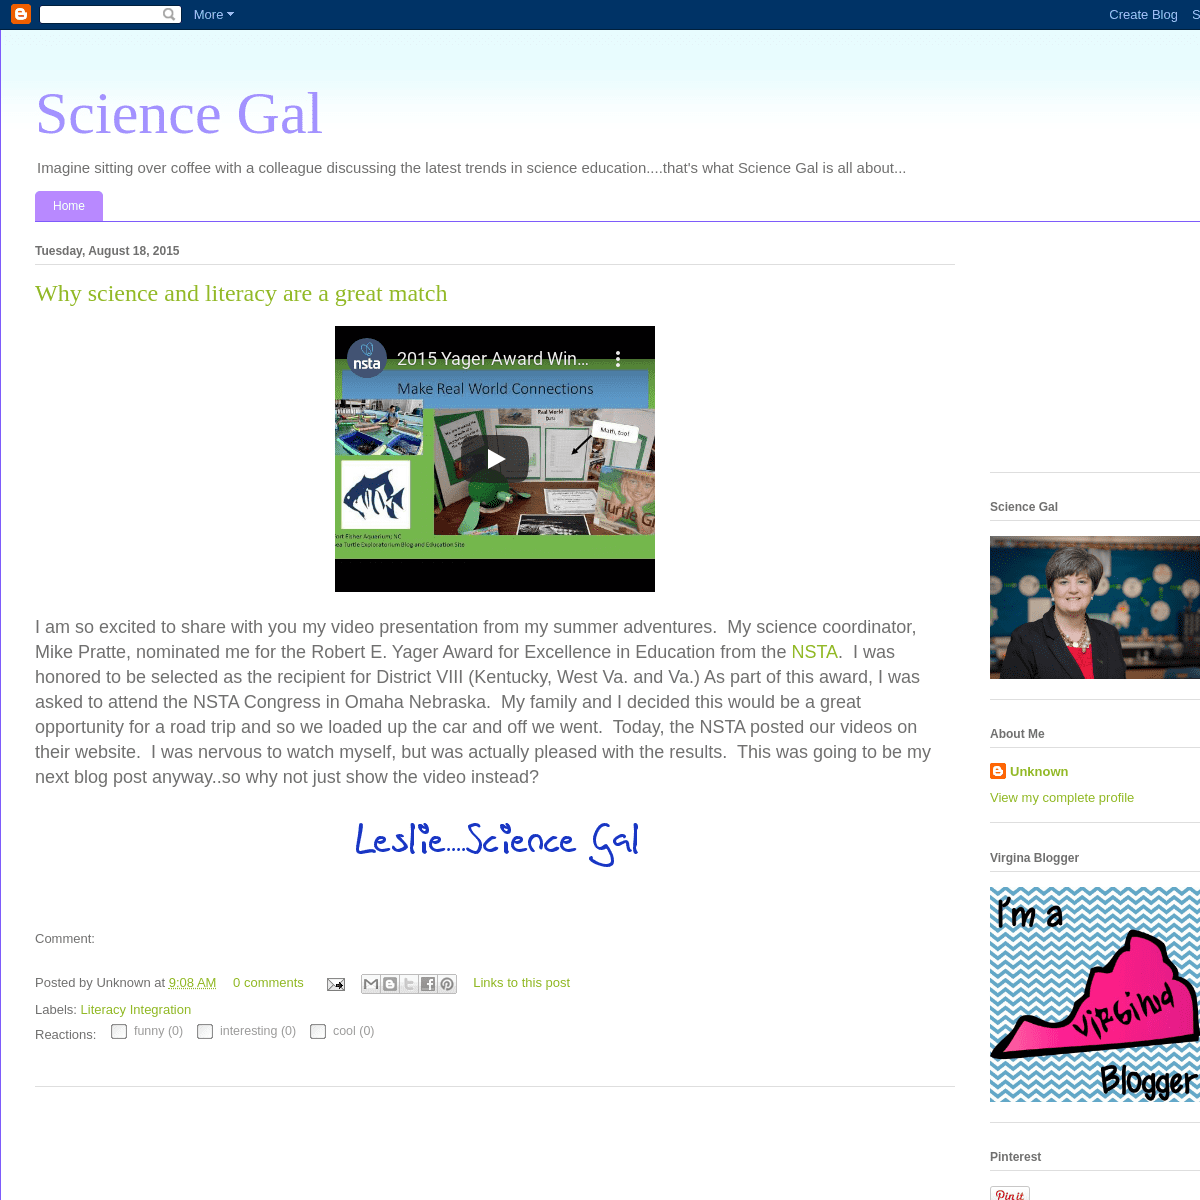 A complete backup of sciencegal-sciencegal.blogspot.com